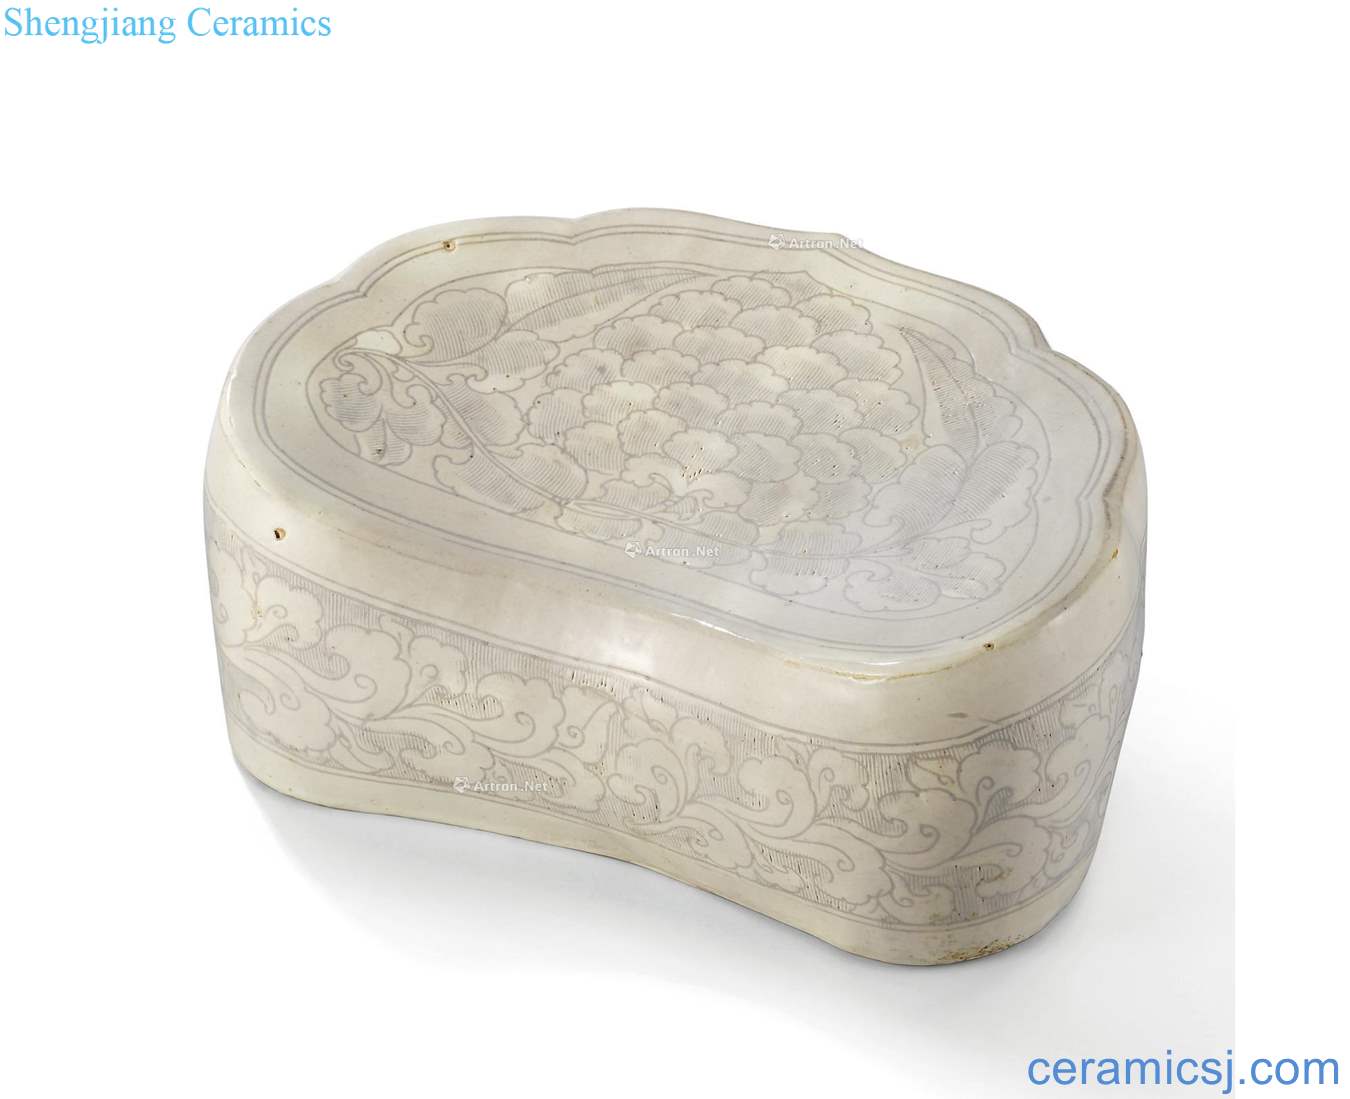 Stuck between northern song dynasty magnetic state kiln white glaze peony grains ruyi shaped pillow